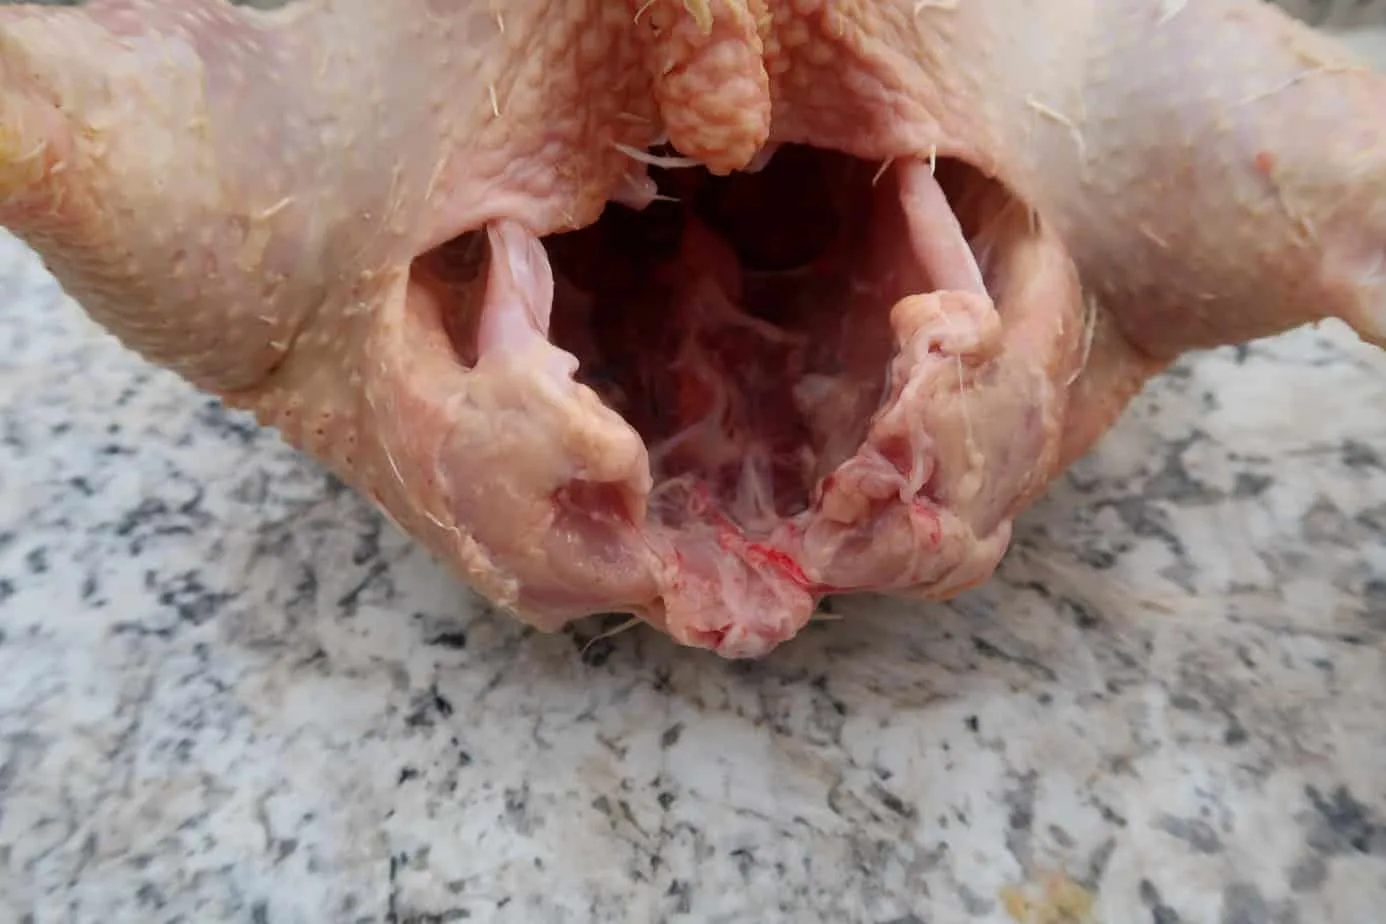 tips and videon on how to gut a chicken